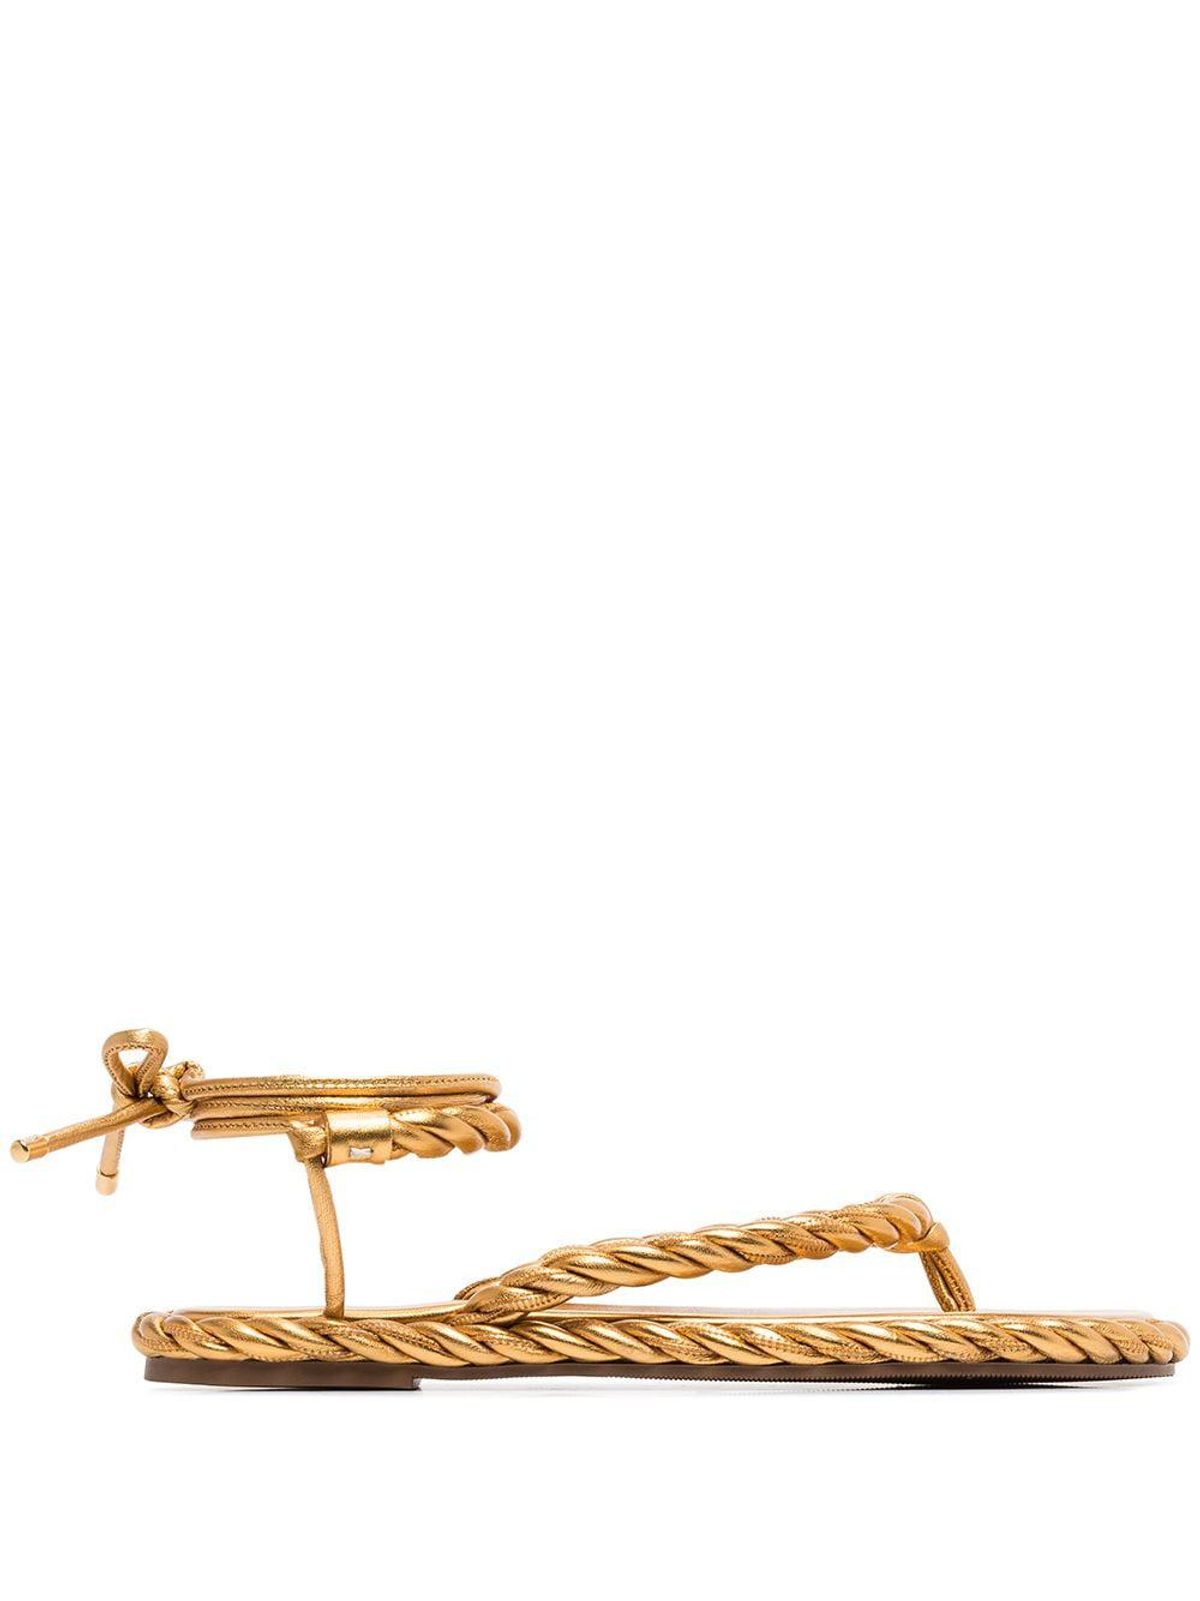 The Rope Sandals